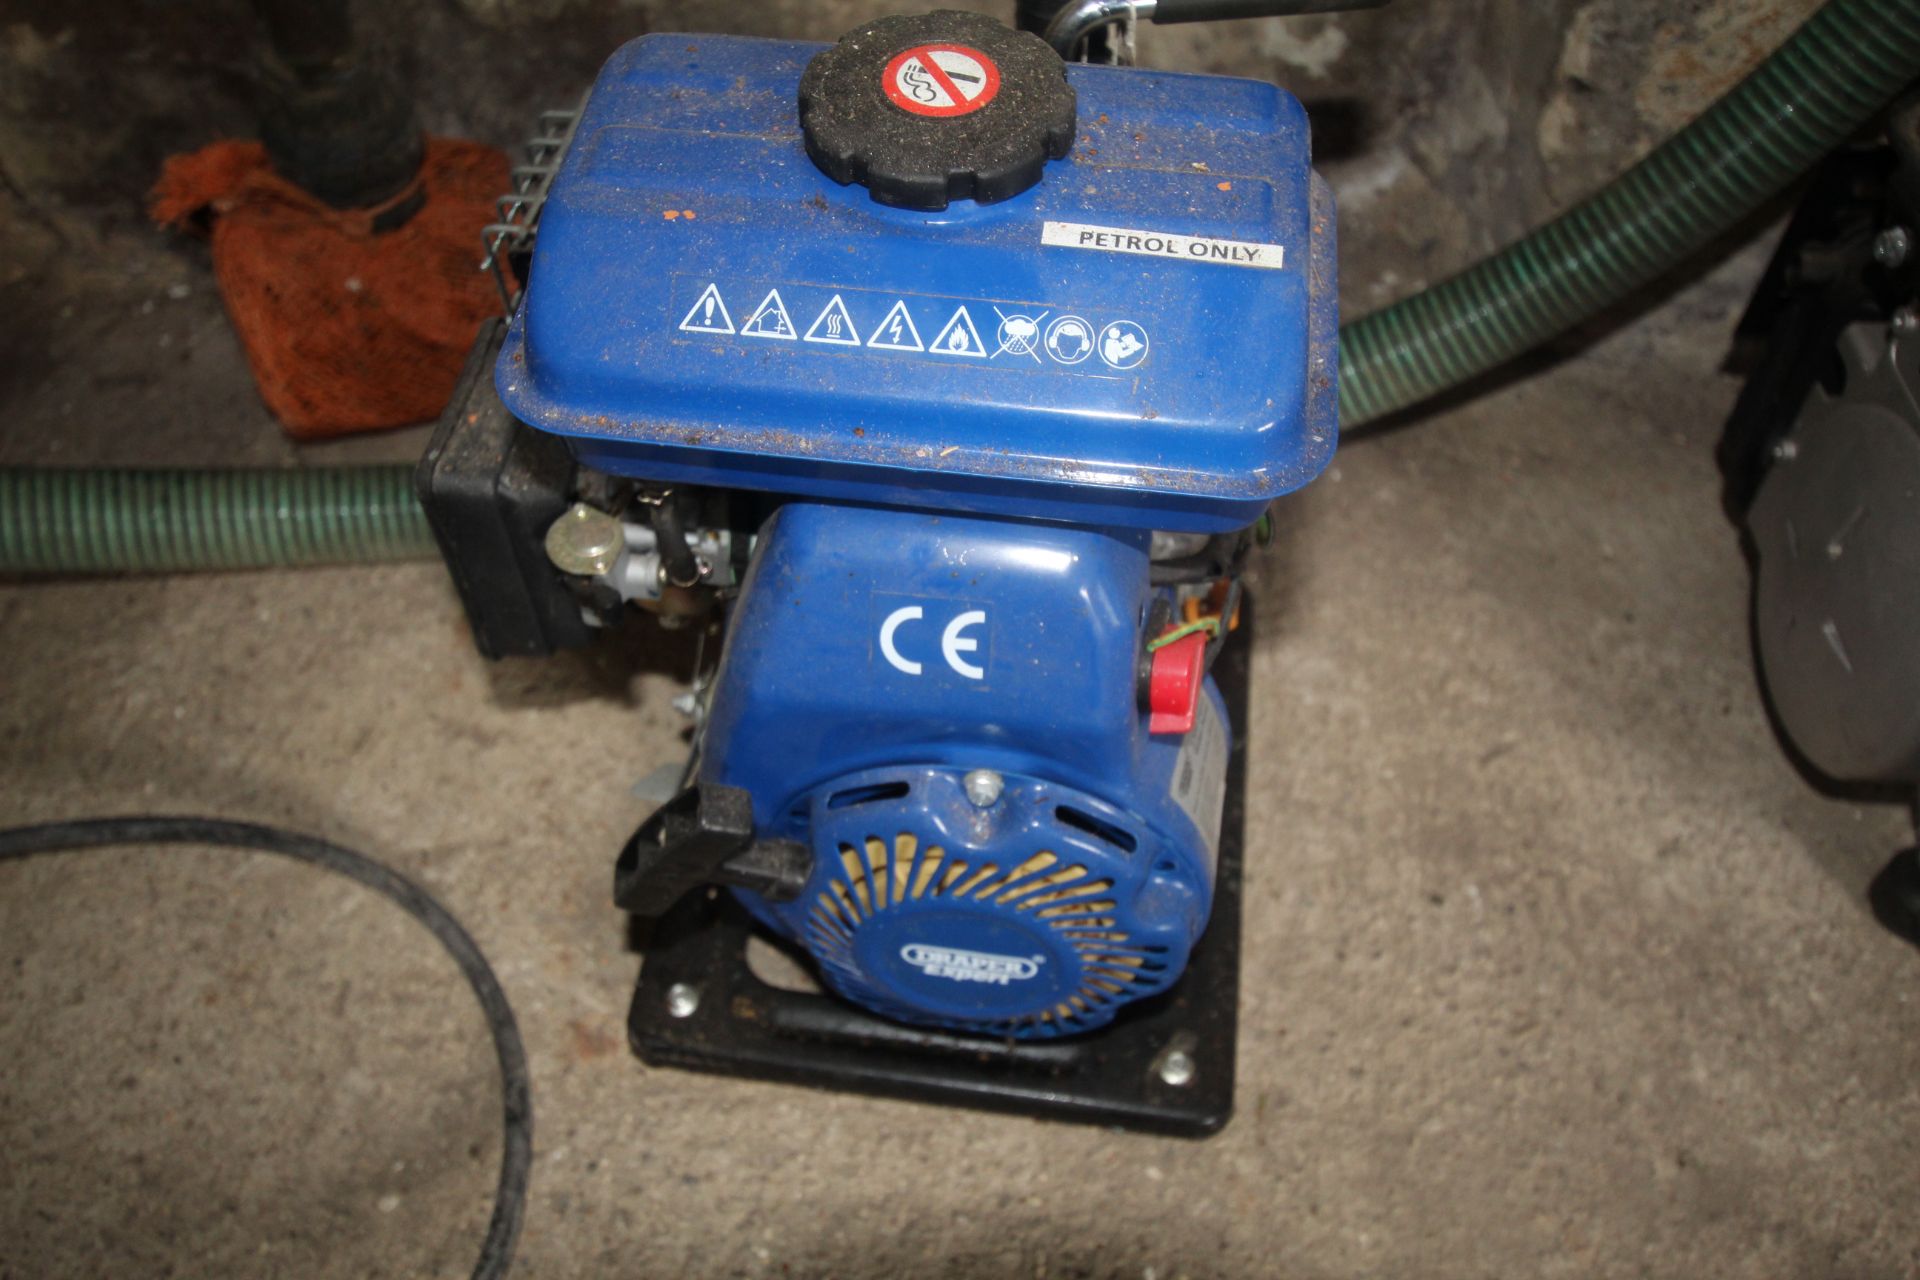 Draper Expert petrol driven water pump with suction hose. - Image 2 of 4